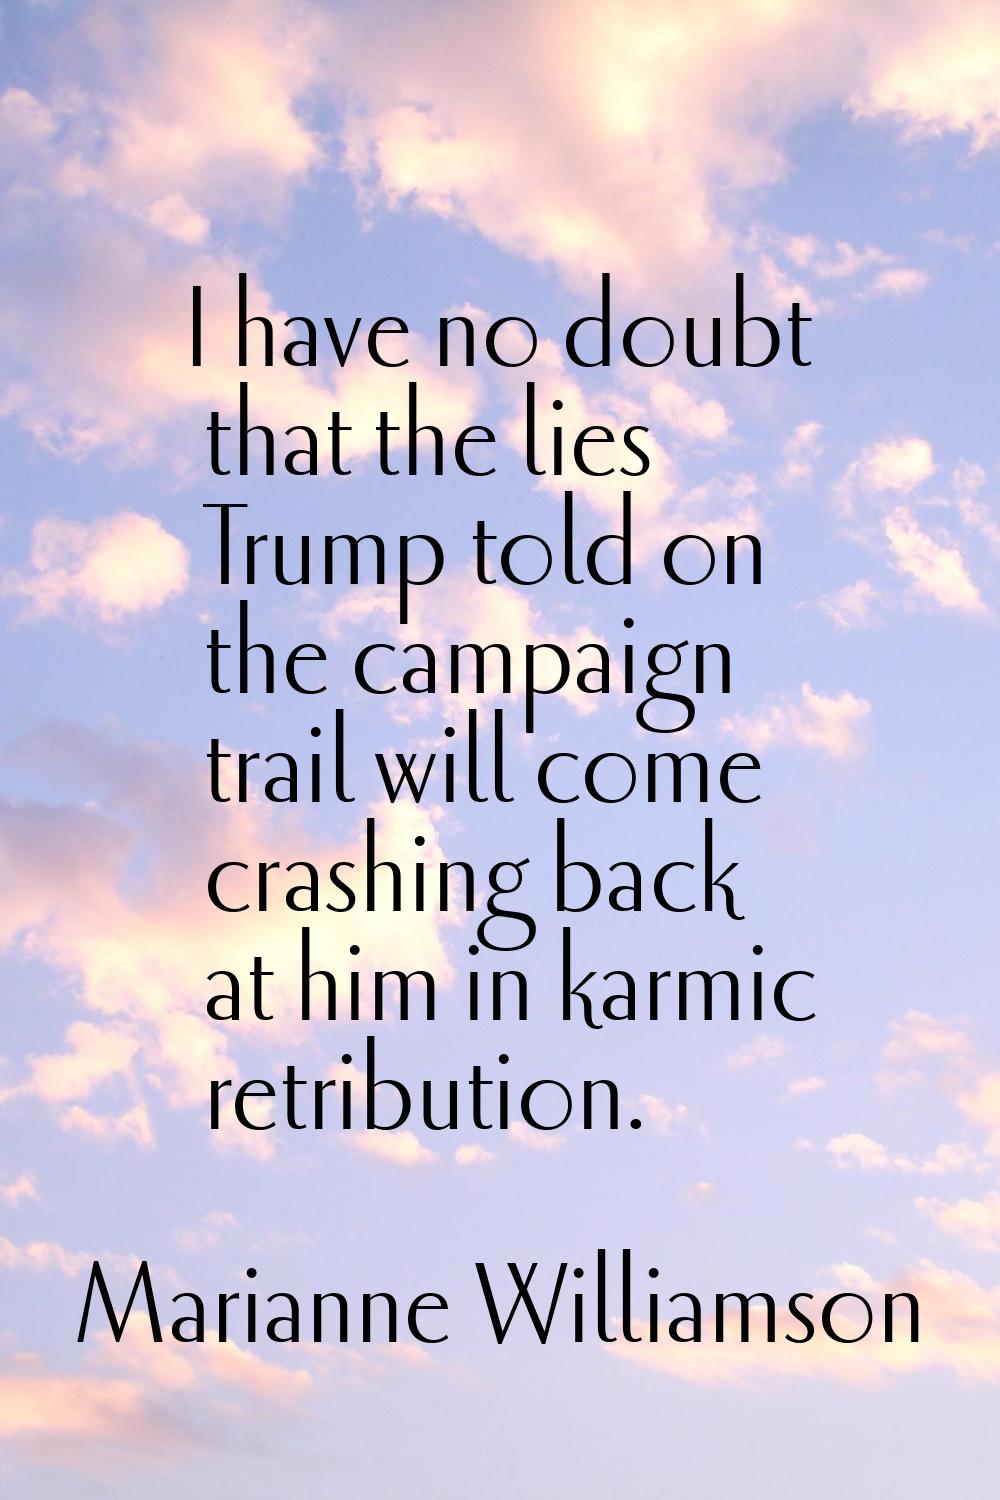 I have no doubt that the lies Trump told on the campaign trail will come crashing back at him in ka